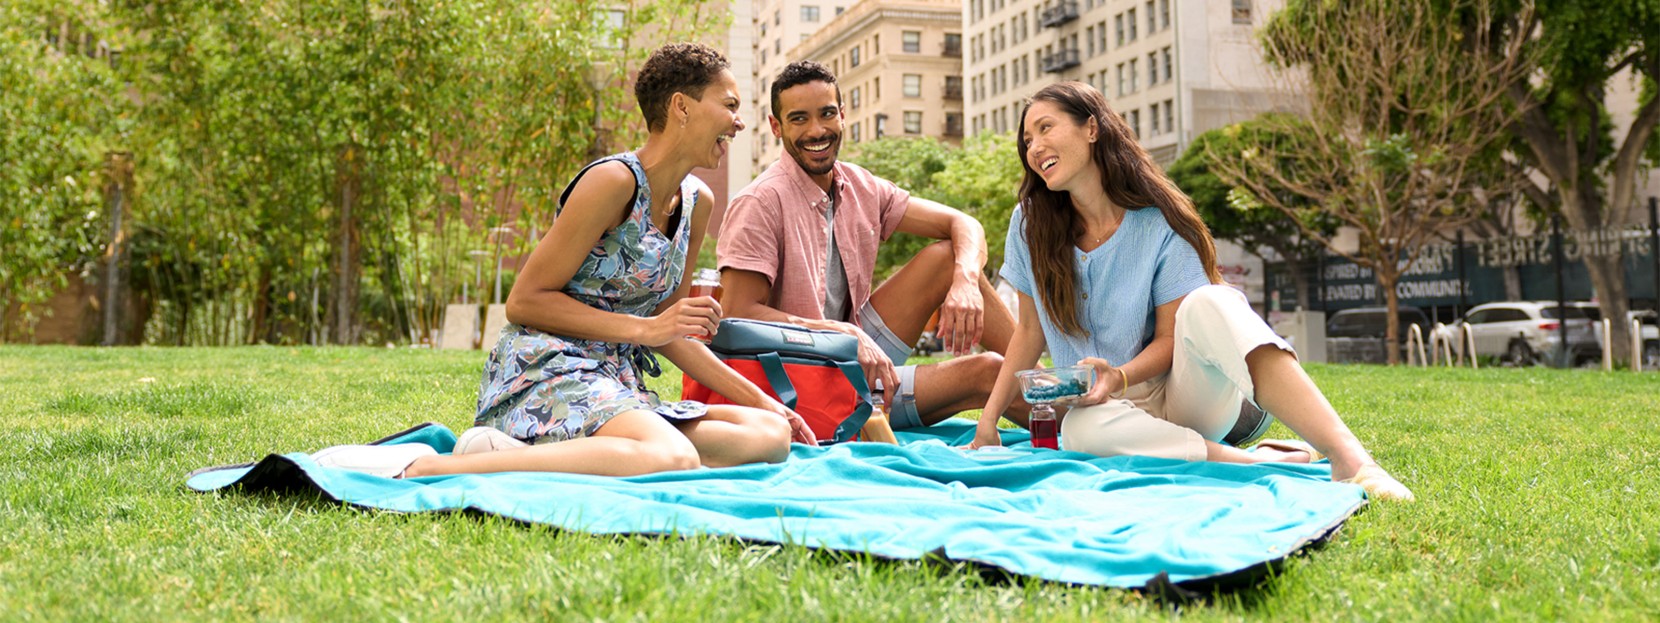 3 people sitting on a blanket in a city park having a picnic.